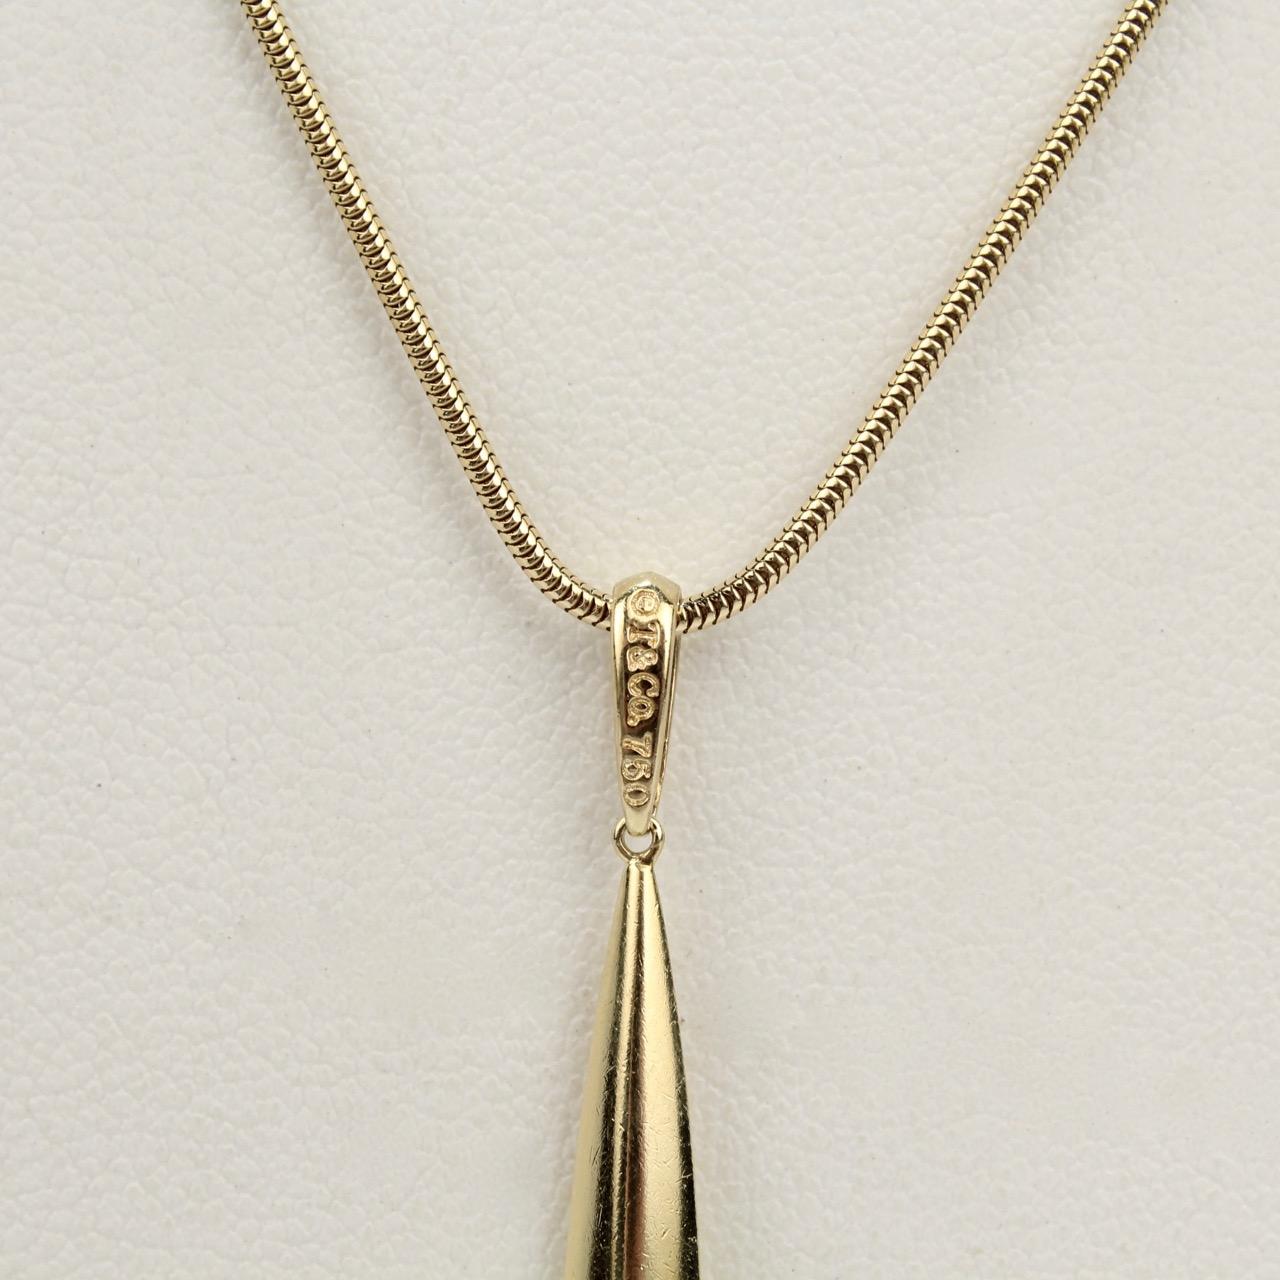 Tiffany & Co. 18 Karat Gold Feather Pendant and Snake Chain Necklace 5